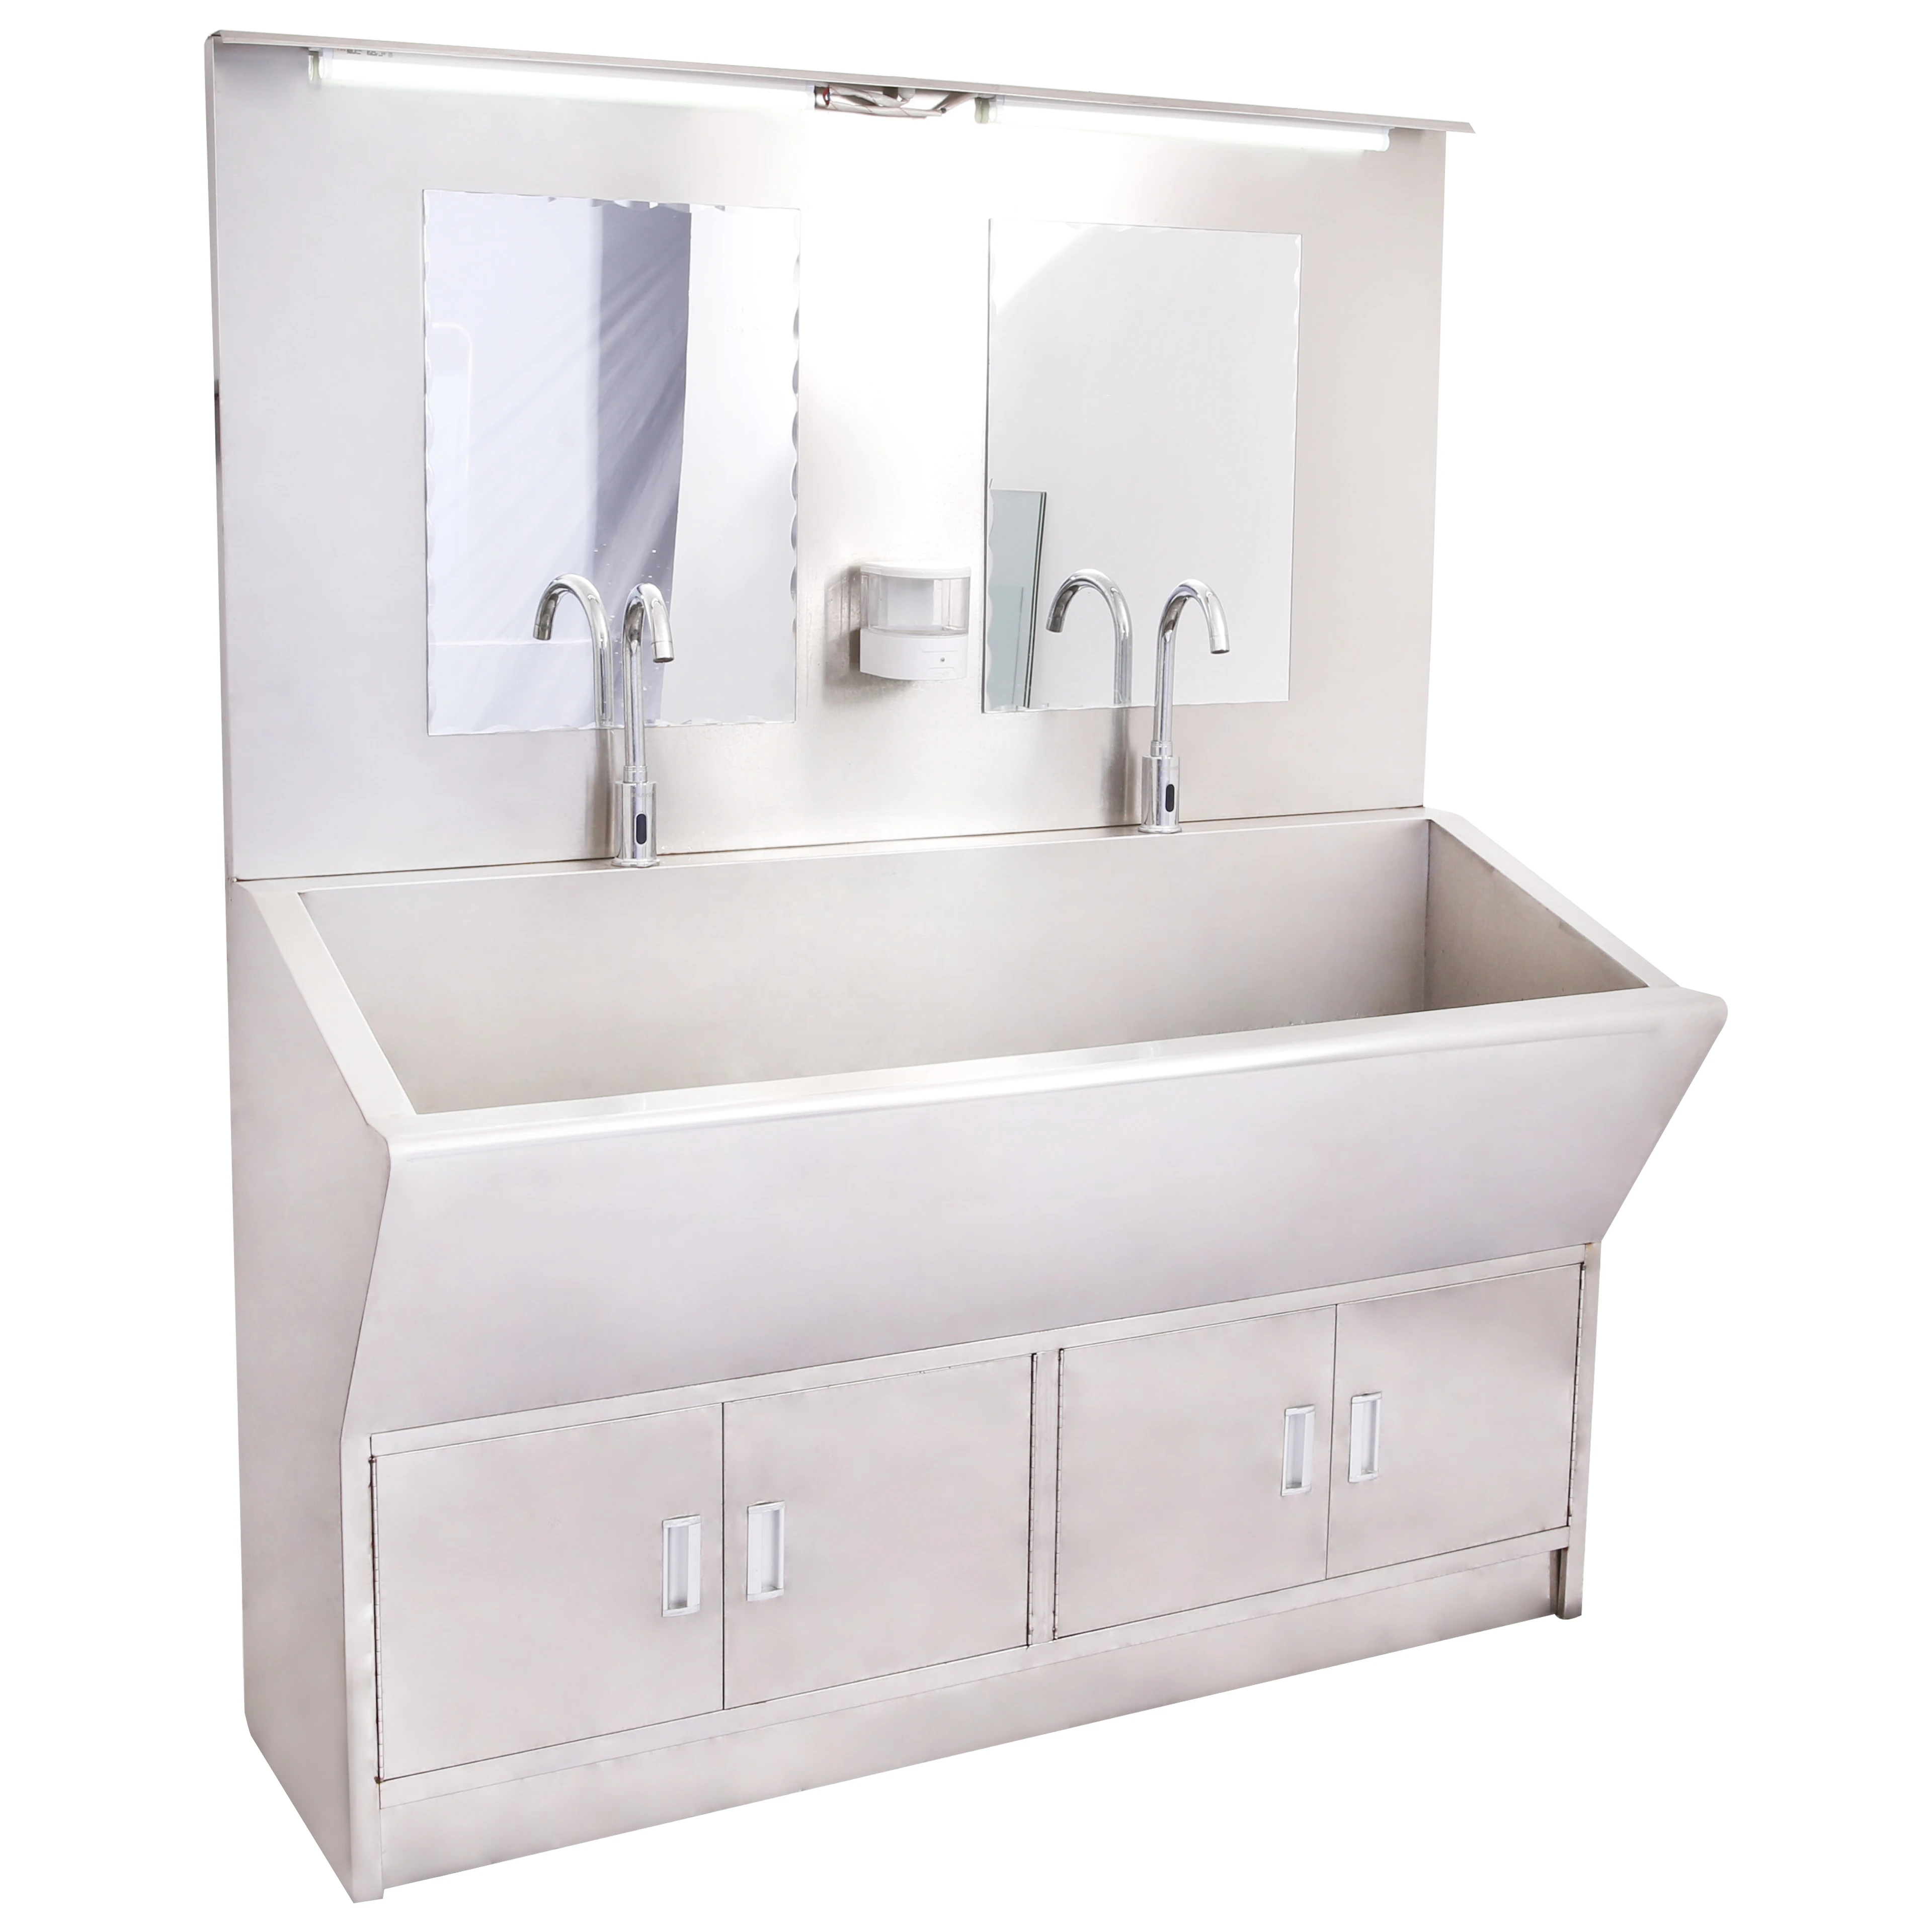 Superior stainless steel 2 positions hand wash basin sink